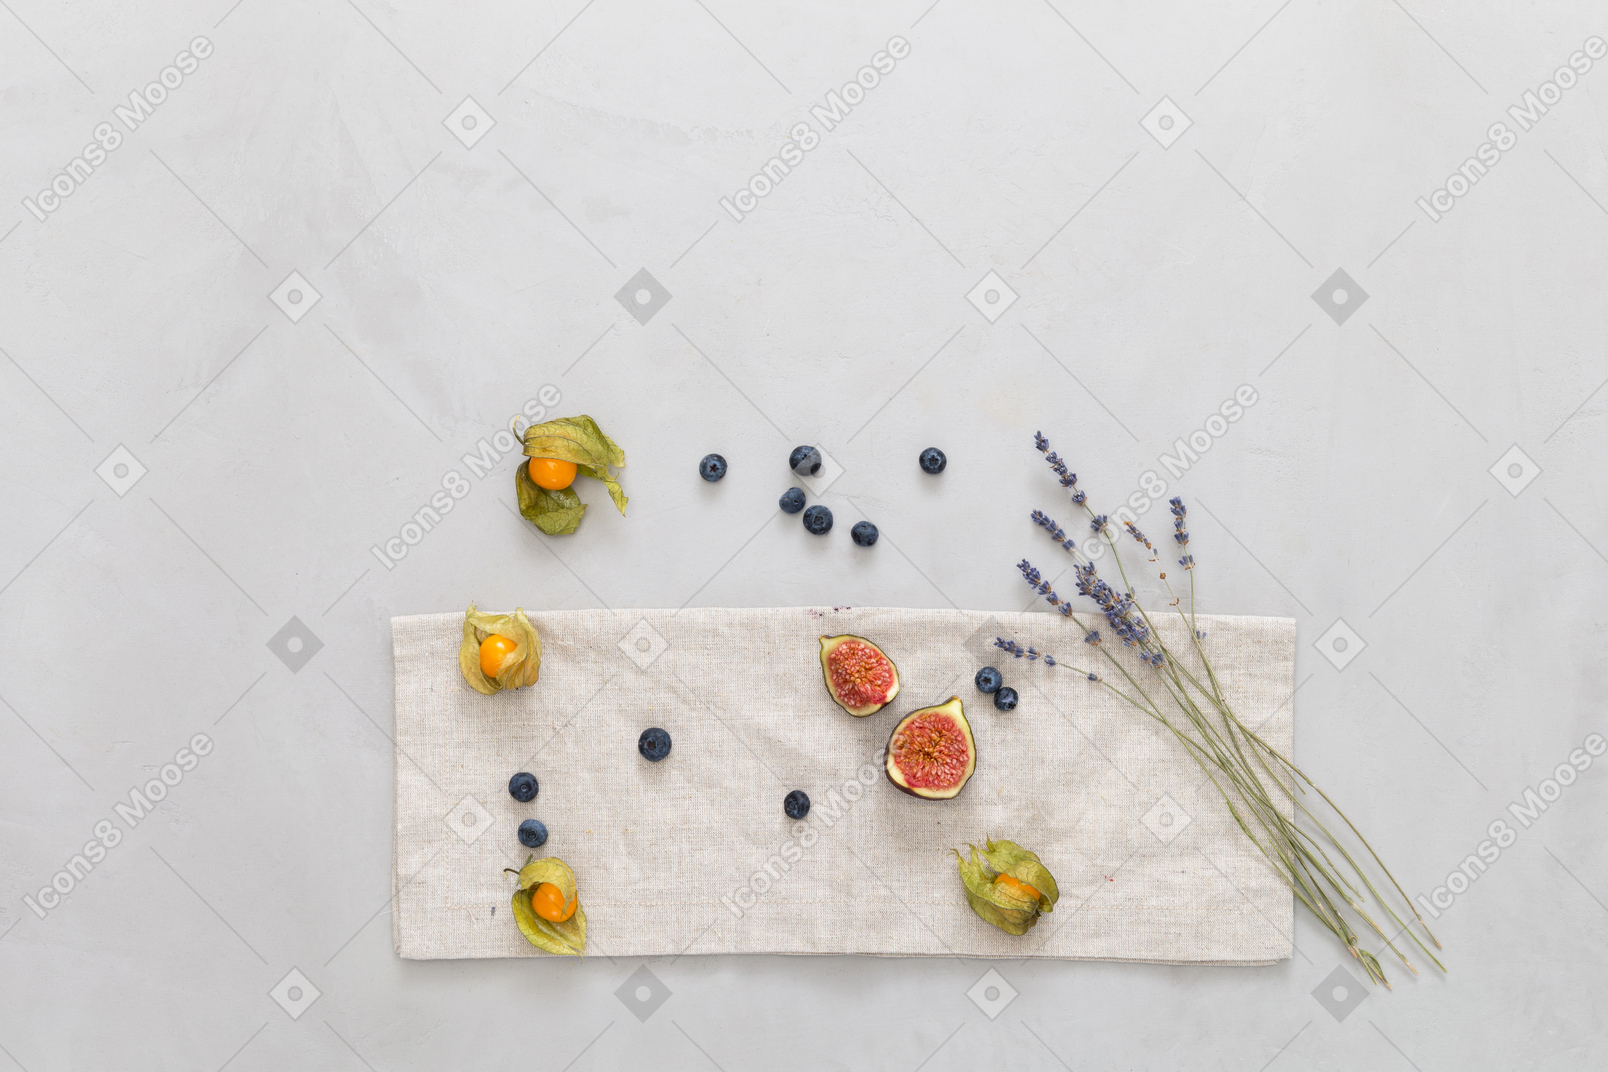 Colorful still life with berries and lavander twigs